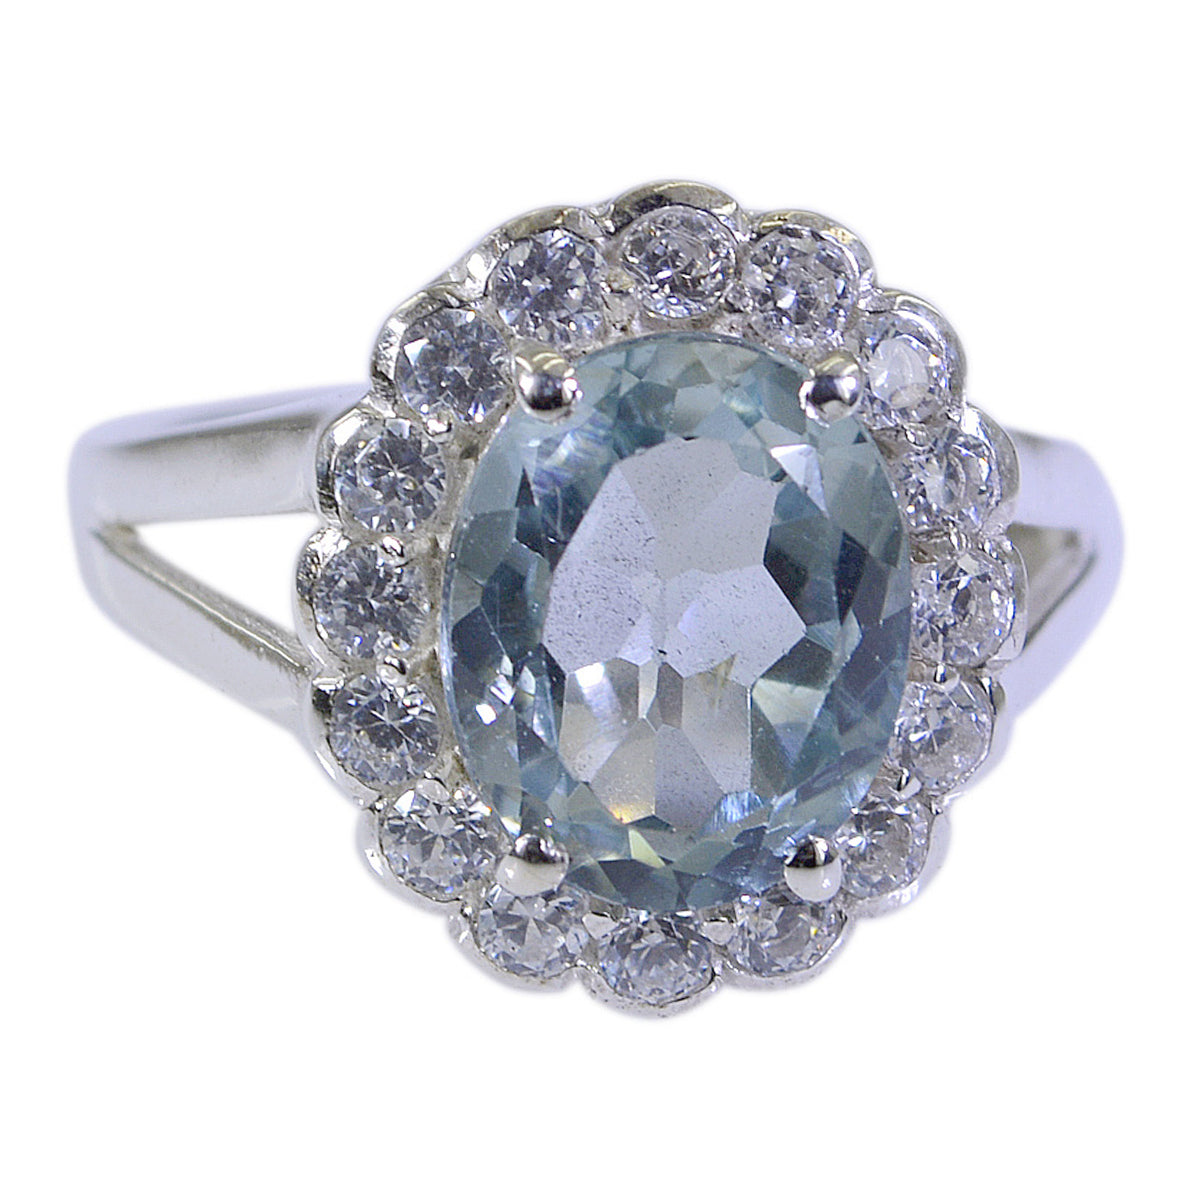 Aesthetic Gem Blue Topaz Sterling Silver Ring Most Expensive Jewelry